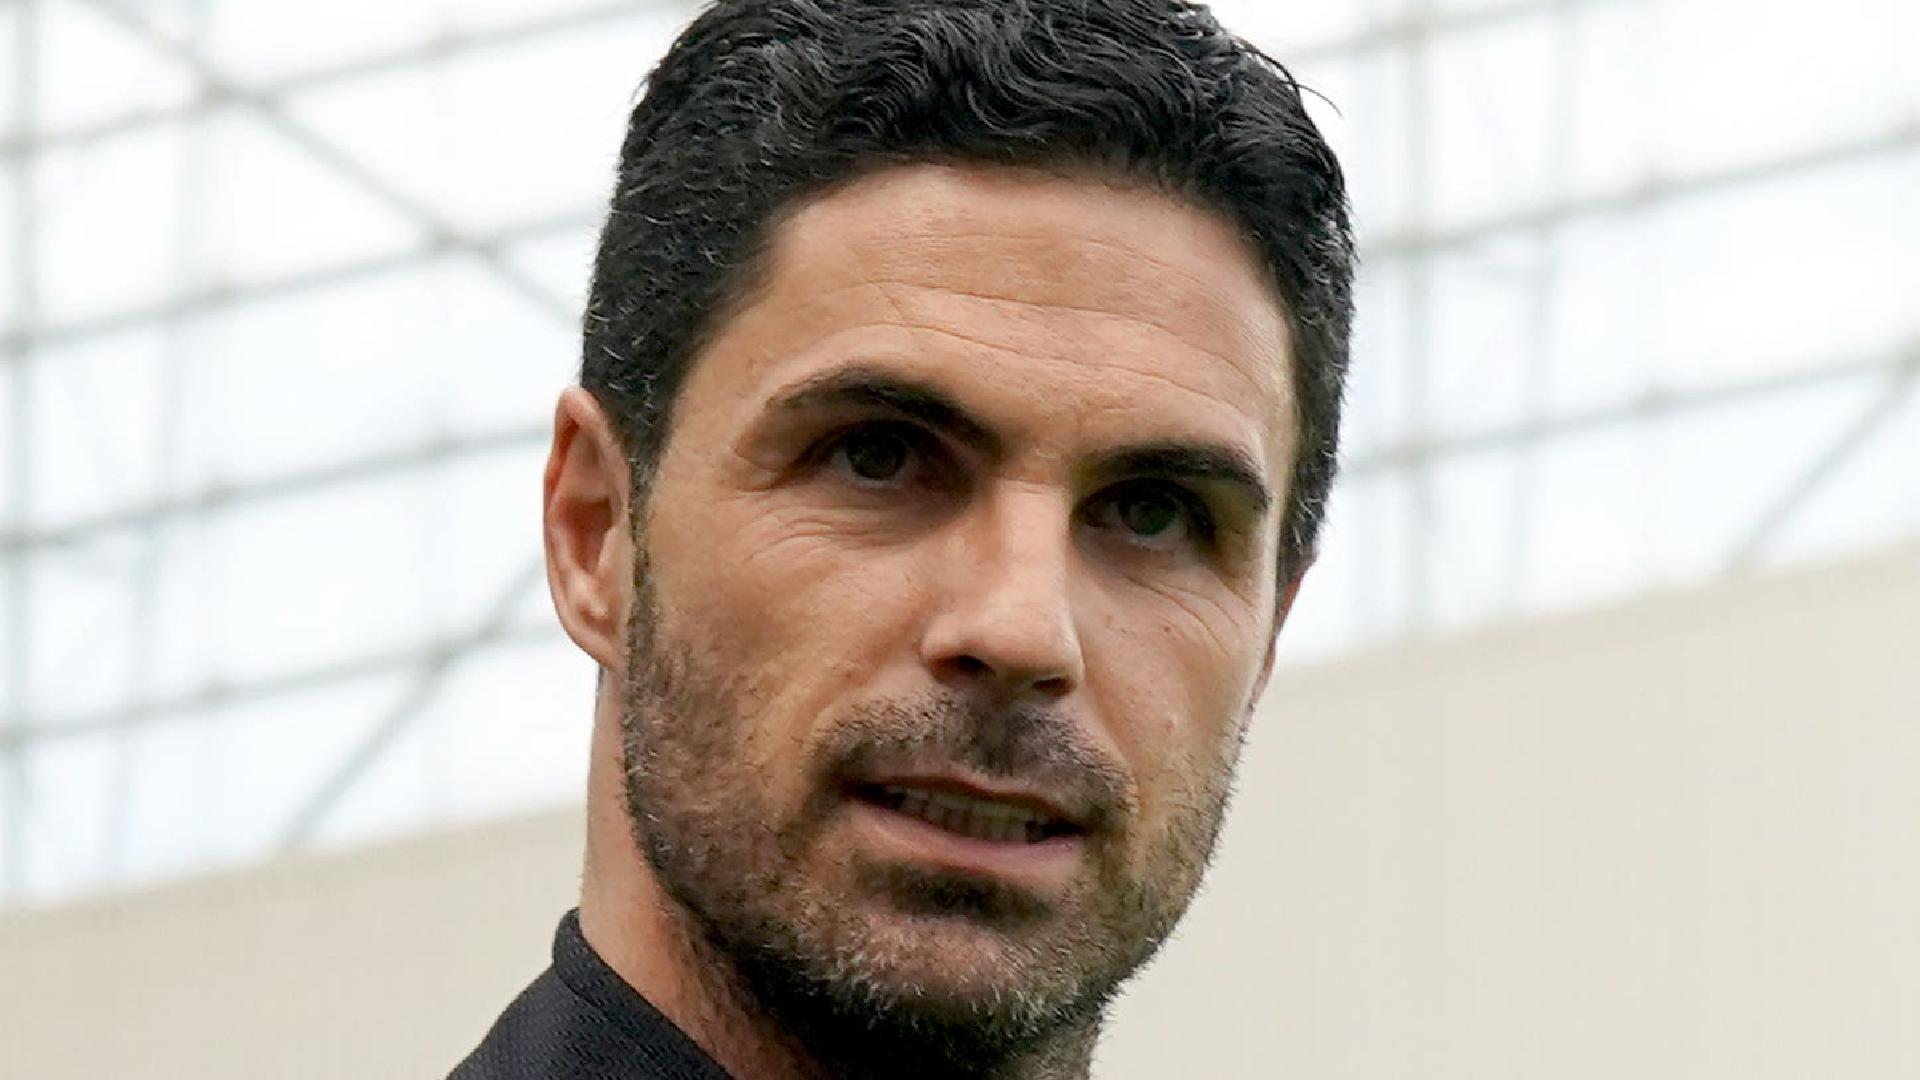 Arsenal boss Mikel Arteta was a happy man after seeing his side win 2-0 at Newcastle to revive their title challenge